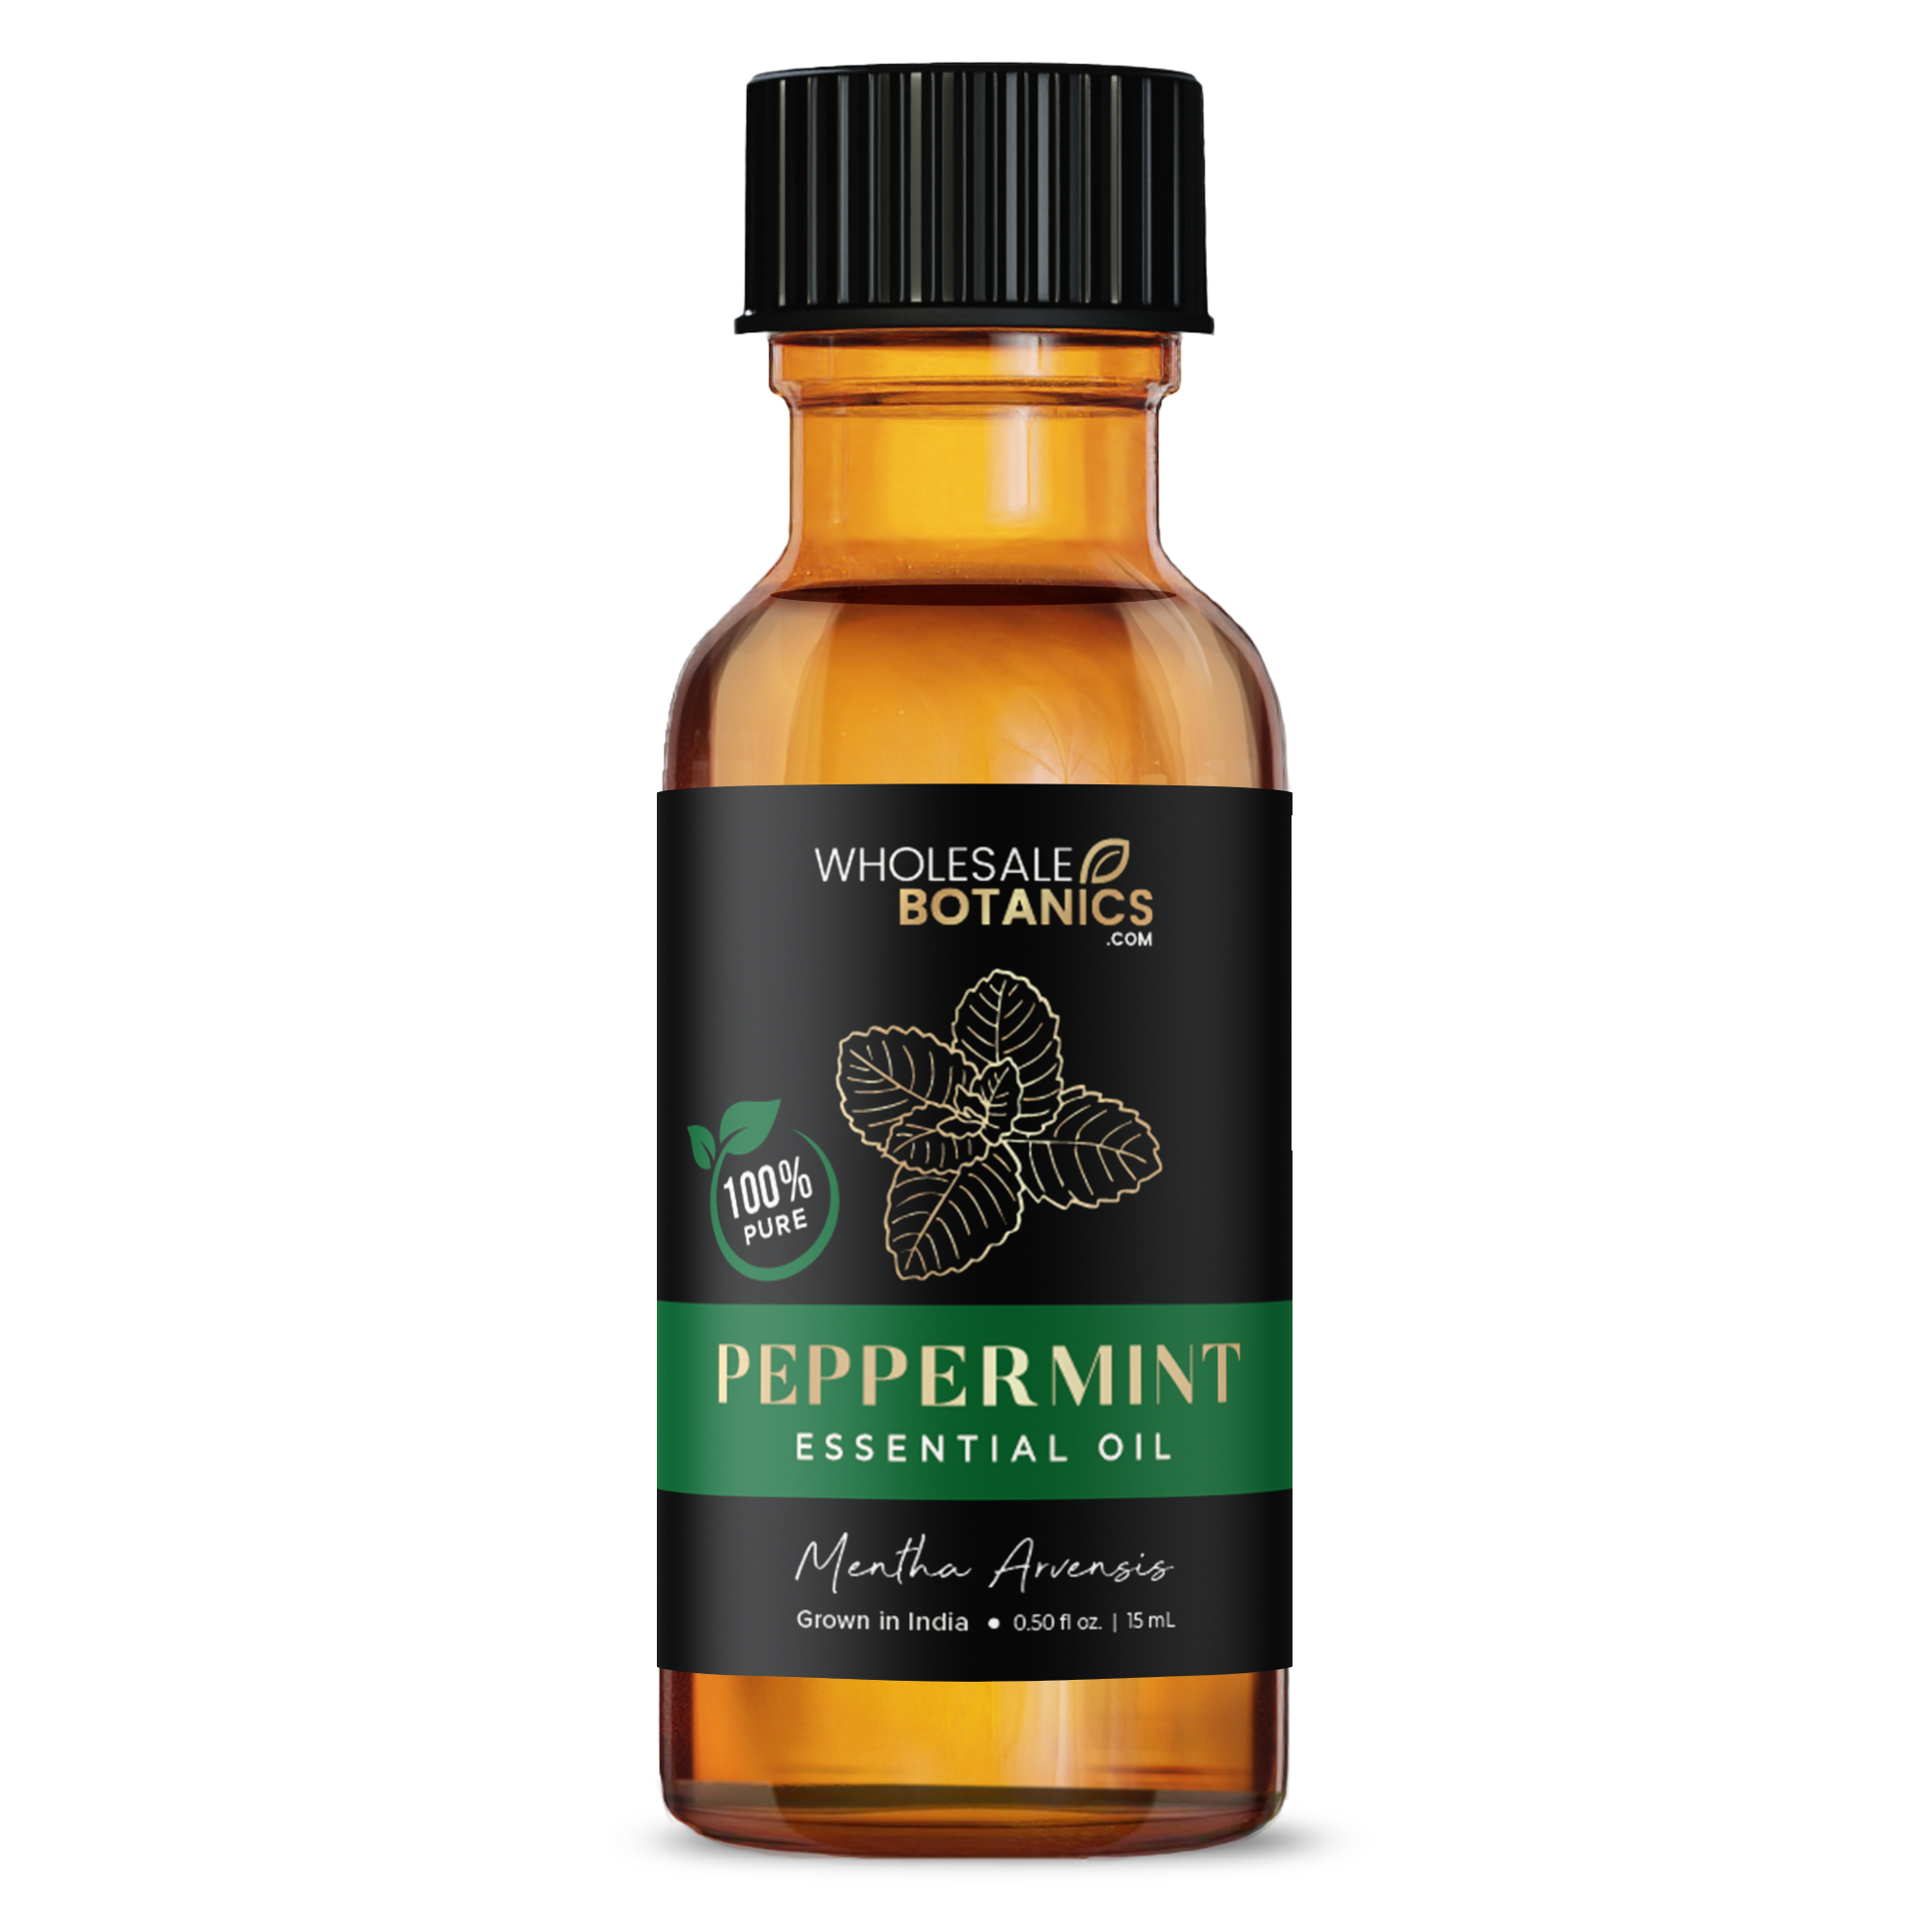 Purity Peppermint Essential Oil - Pure Mentha Arvensis - 0.5 oz